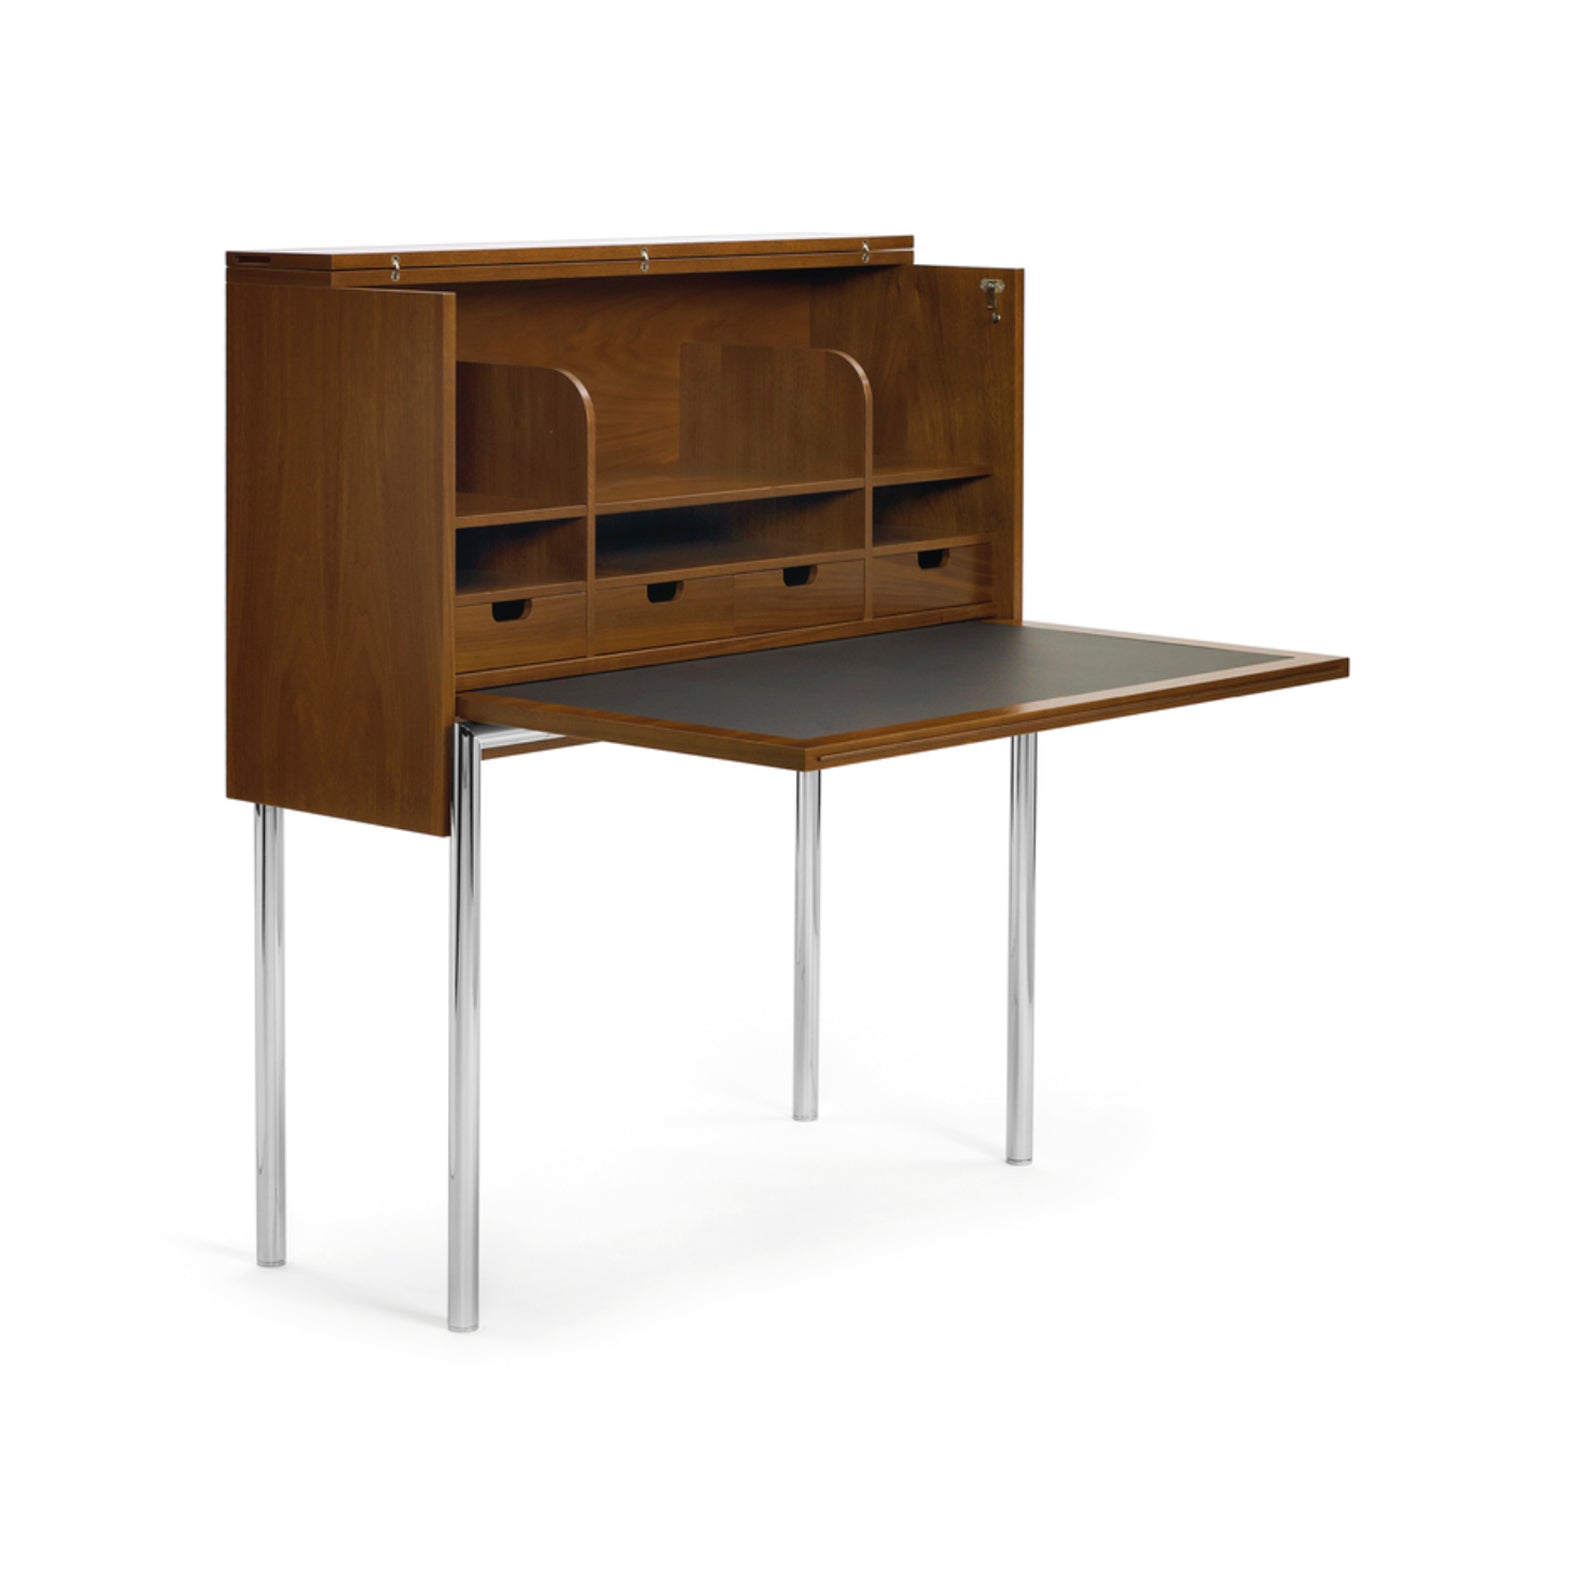 Orcus Home Desk